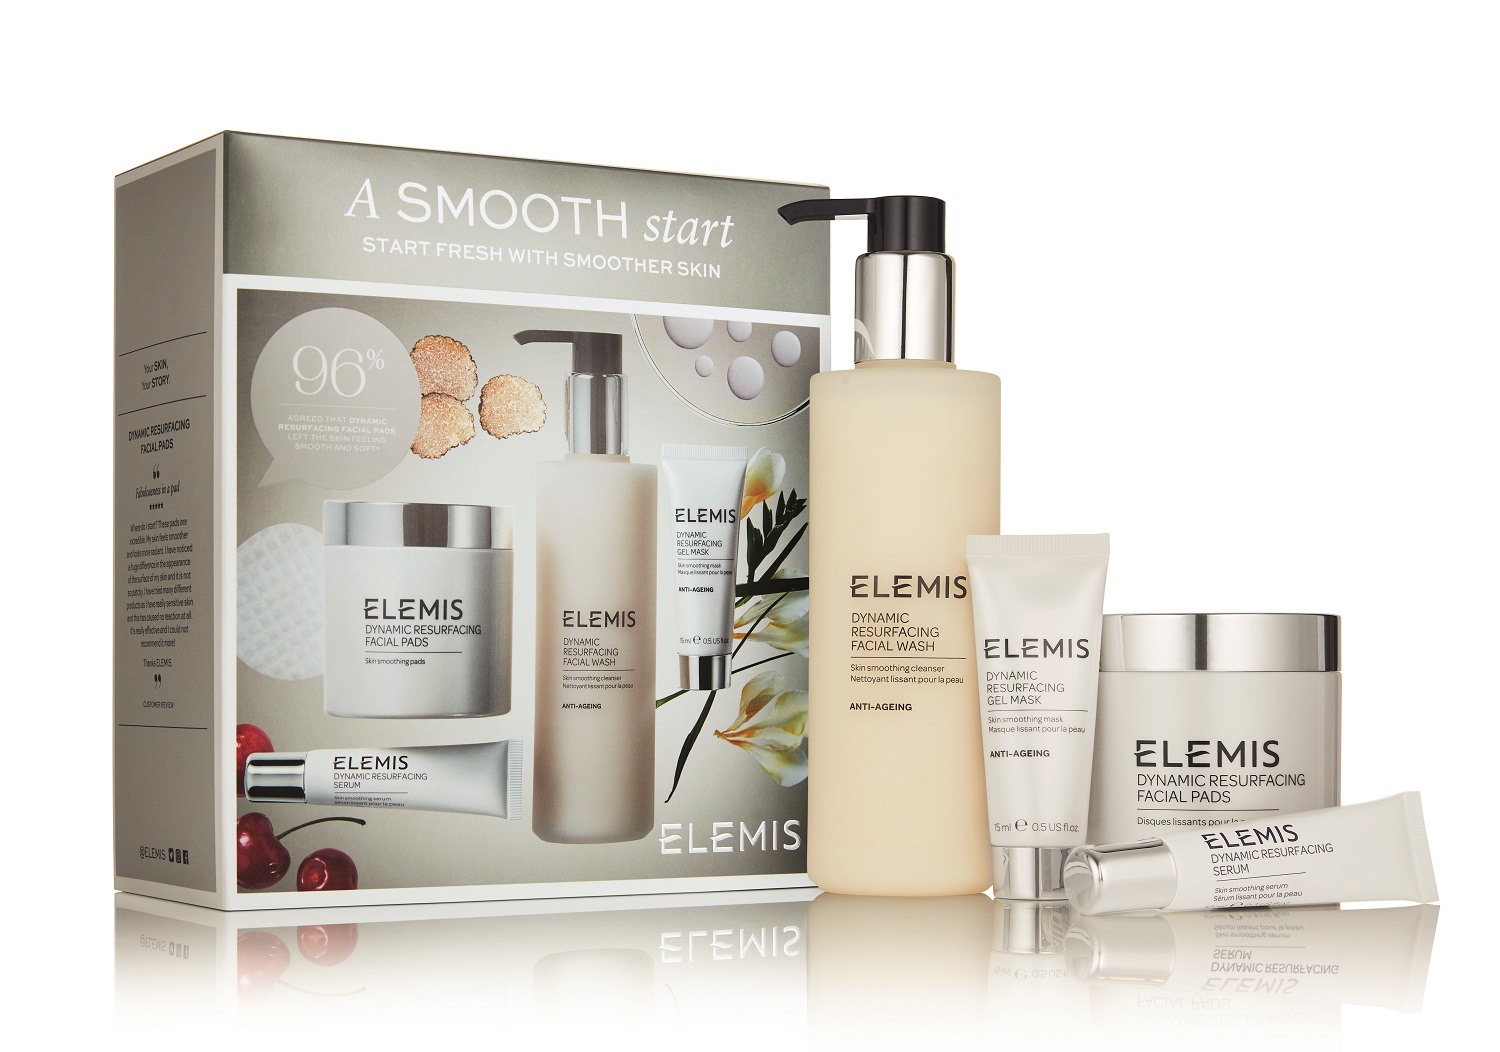 Elemis A Smooth Start skincare BeautyandHairdressing